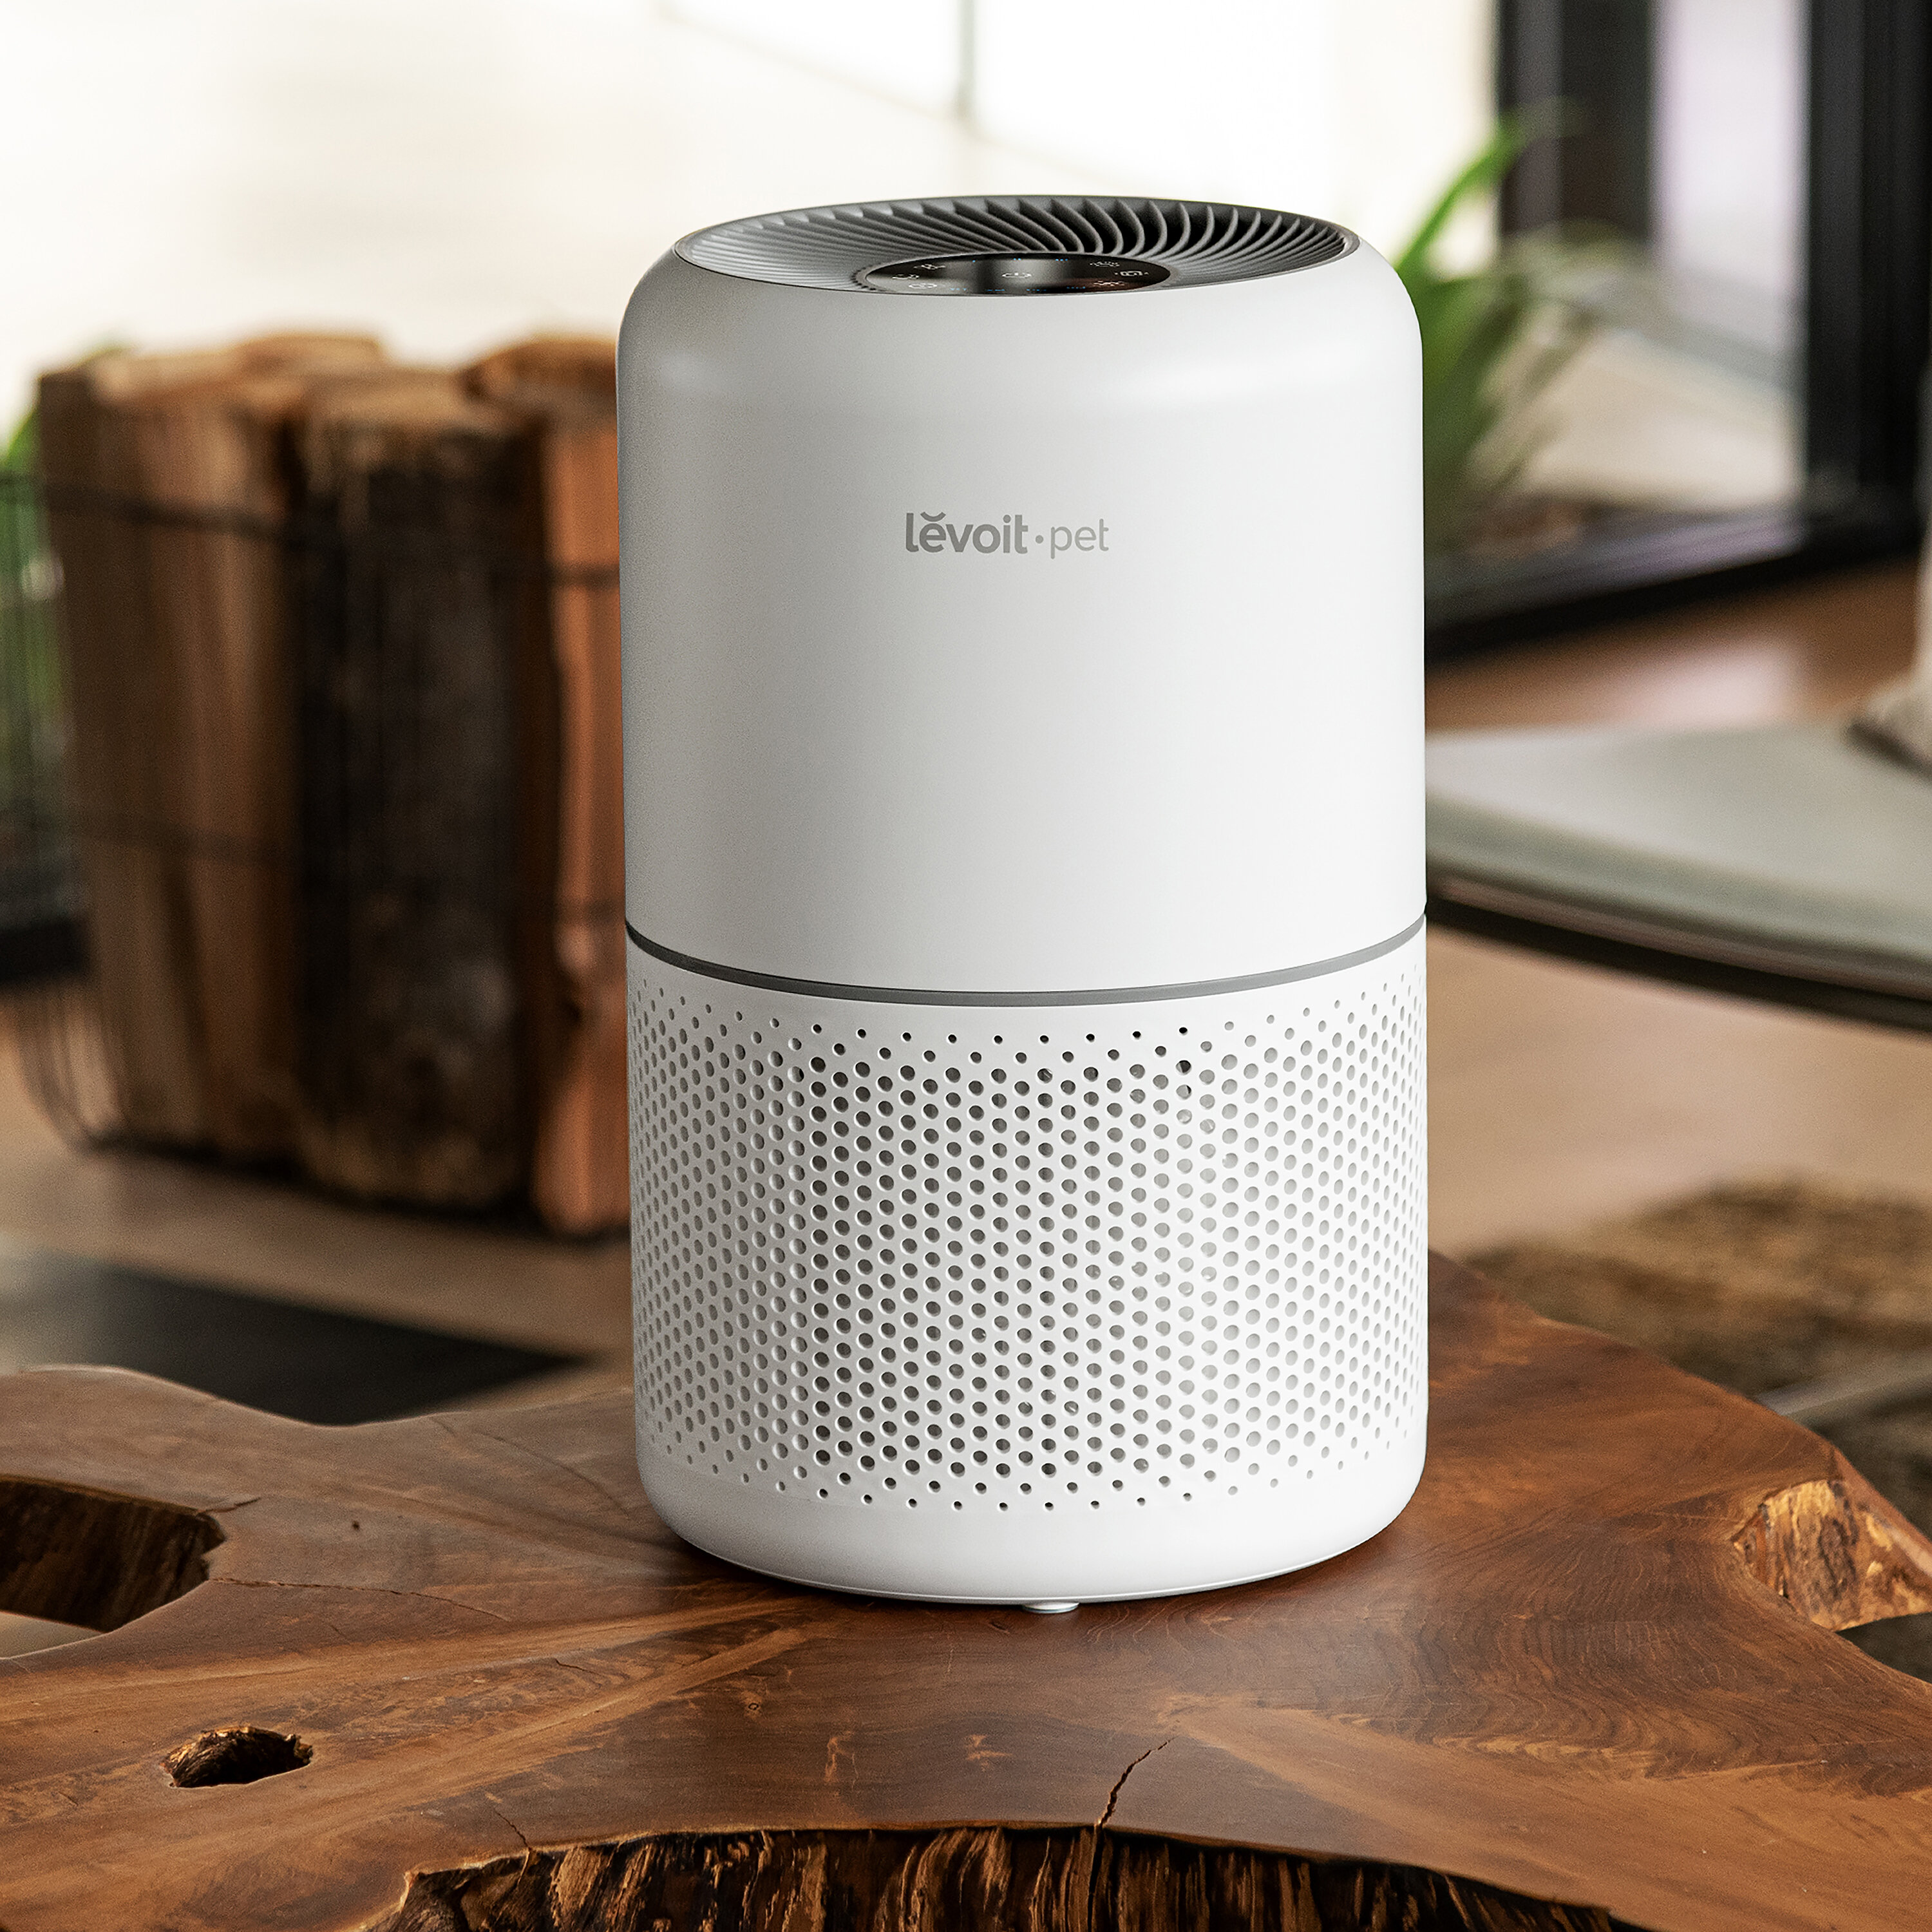  LEVOIT Air Purifiers for Bedroom Home, 3-in-1 Filter